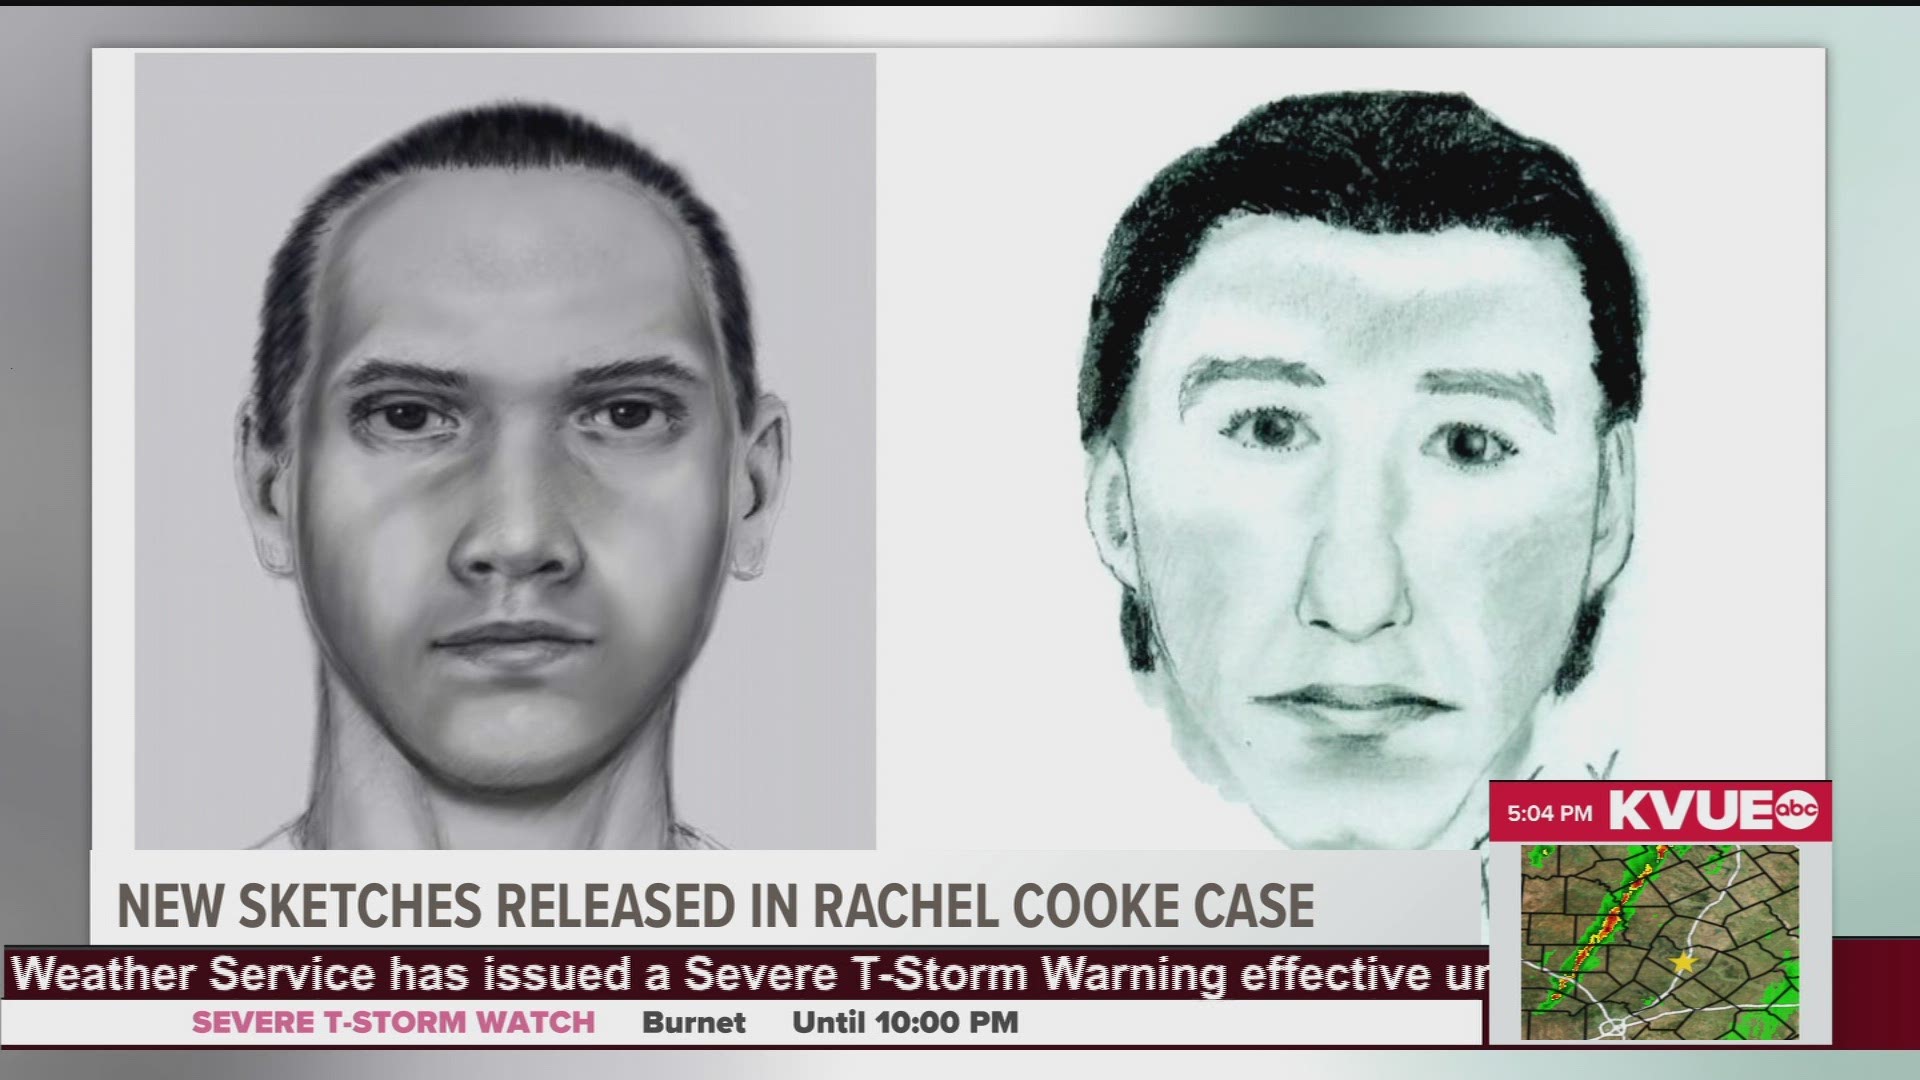 New tips, and now new sketches, show two persons of interest in the Rachel Cooke case.